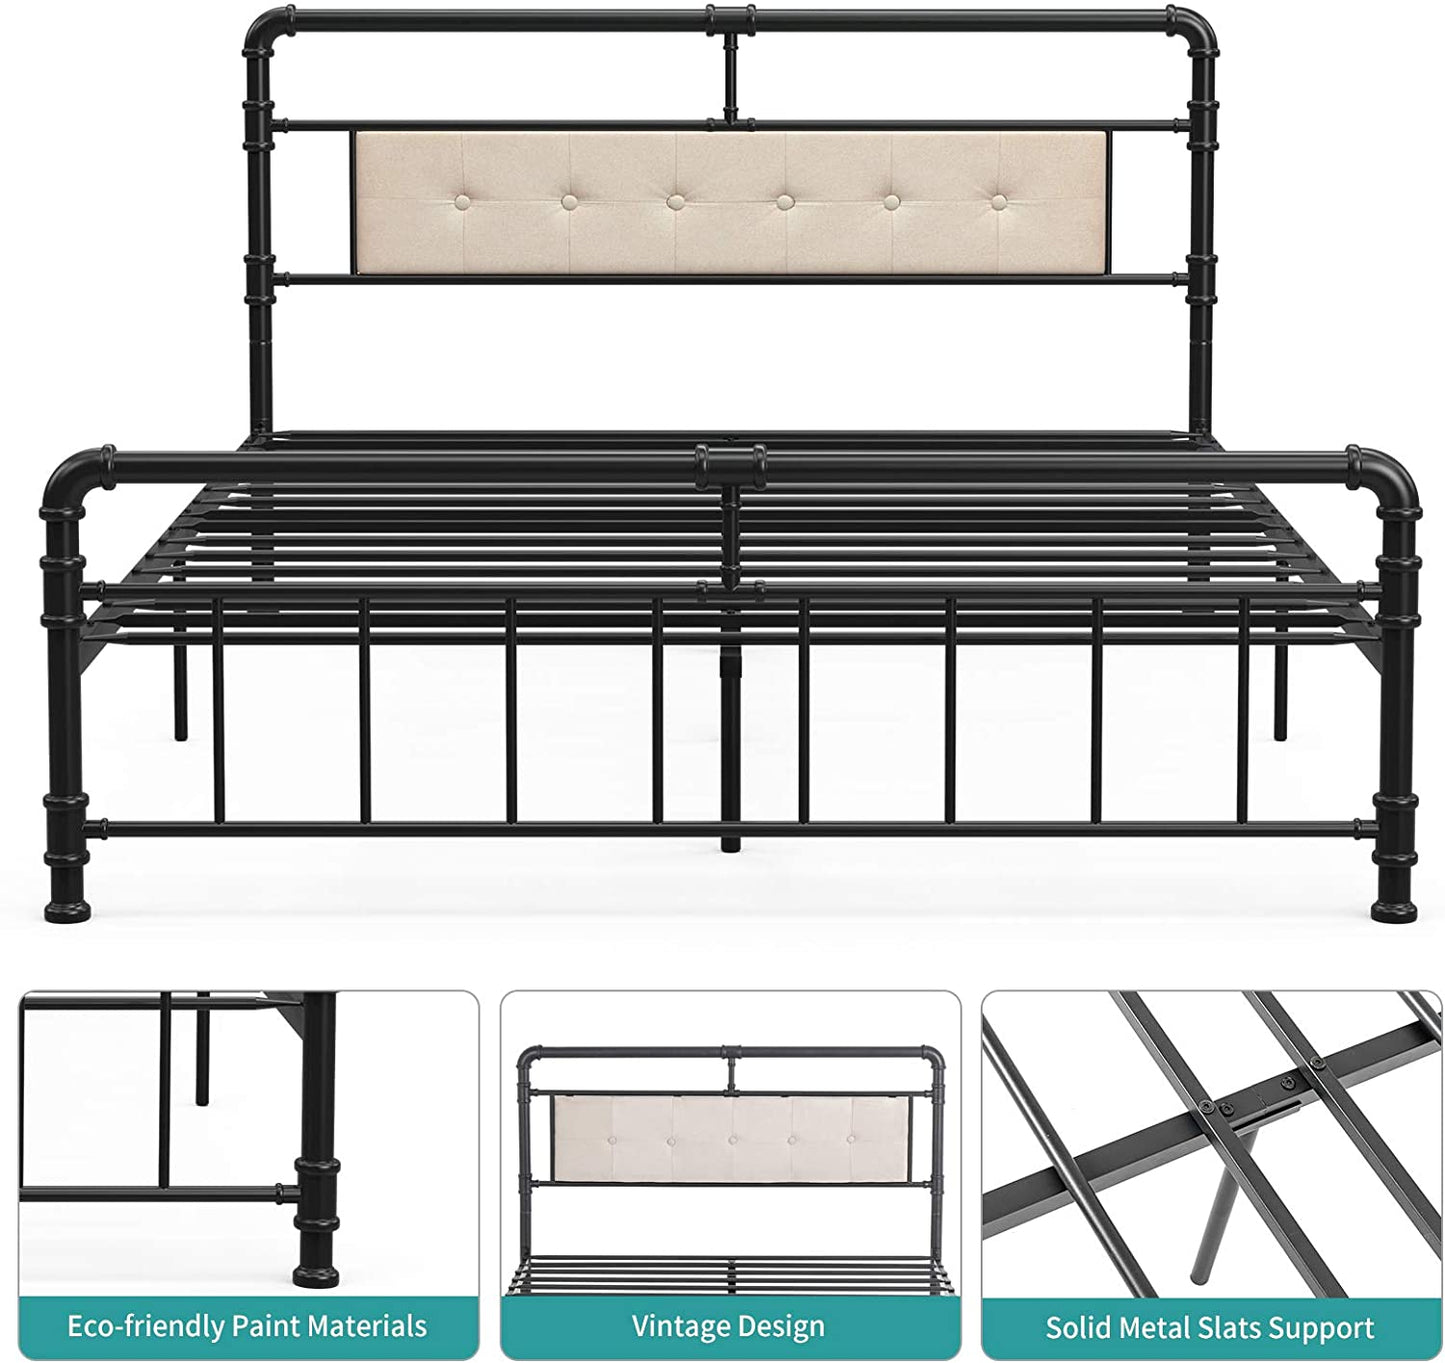 Classic Reinforced Metal Bed Frame - specifications